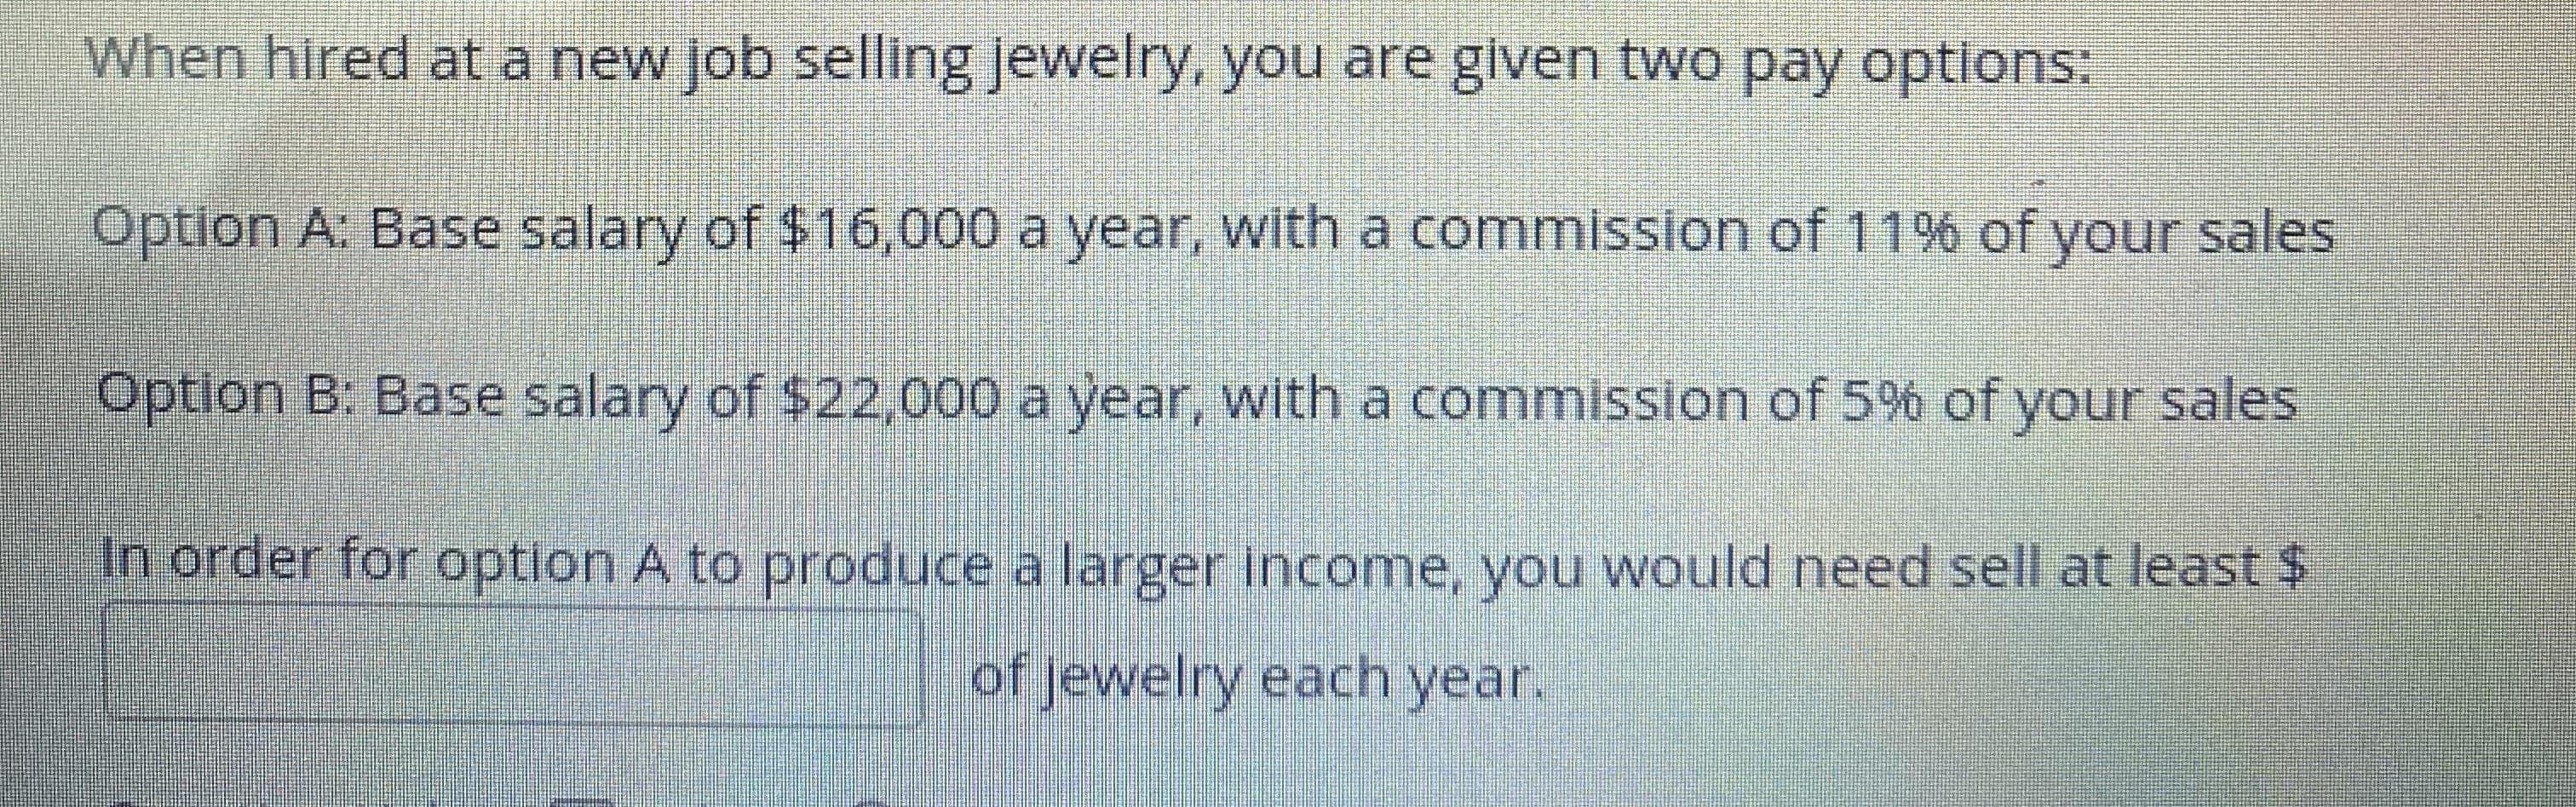 When hired at a new job selling jewelry, you are given two pay options:
Option A: Base salary of $16,000 a year, with a commission of 11% of your sales
